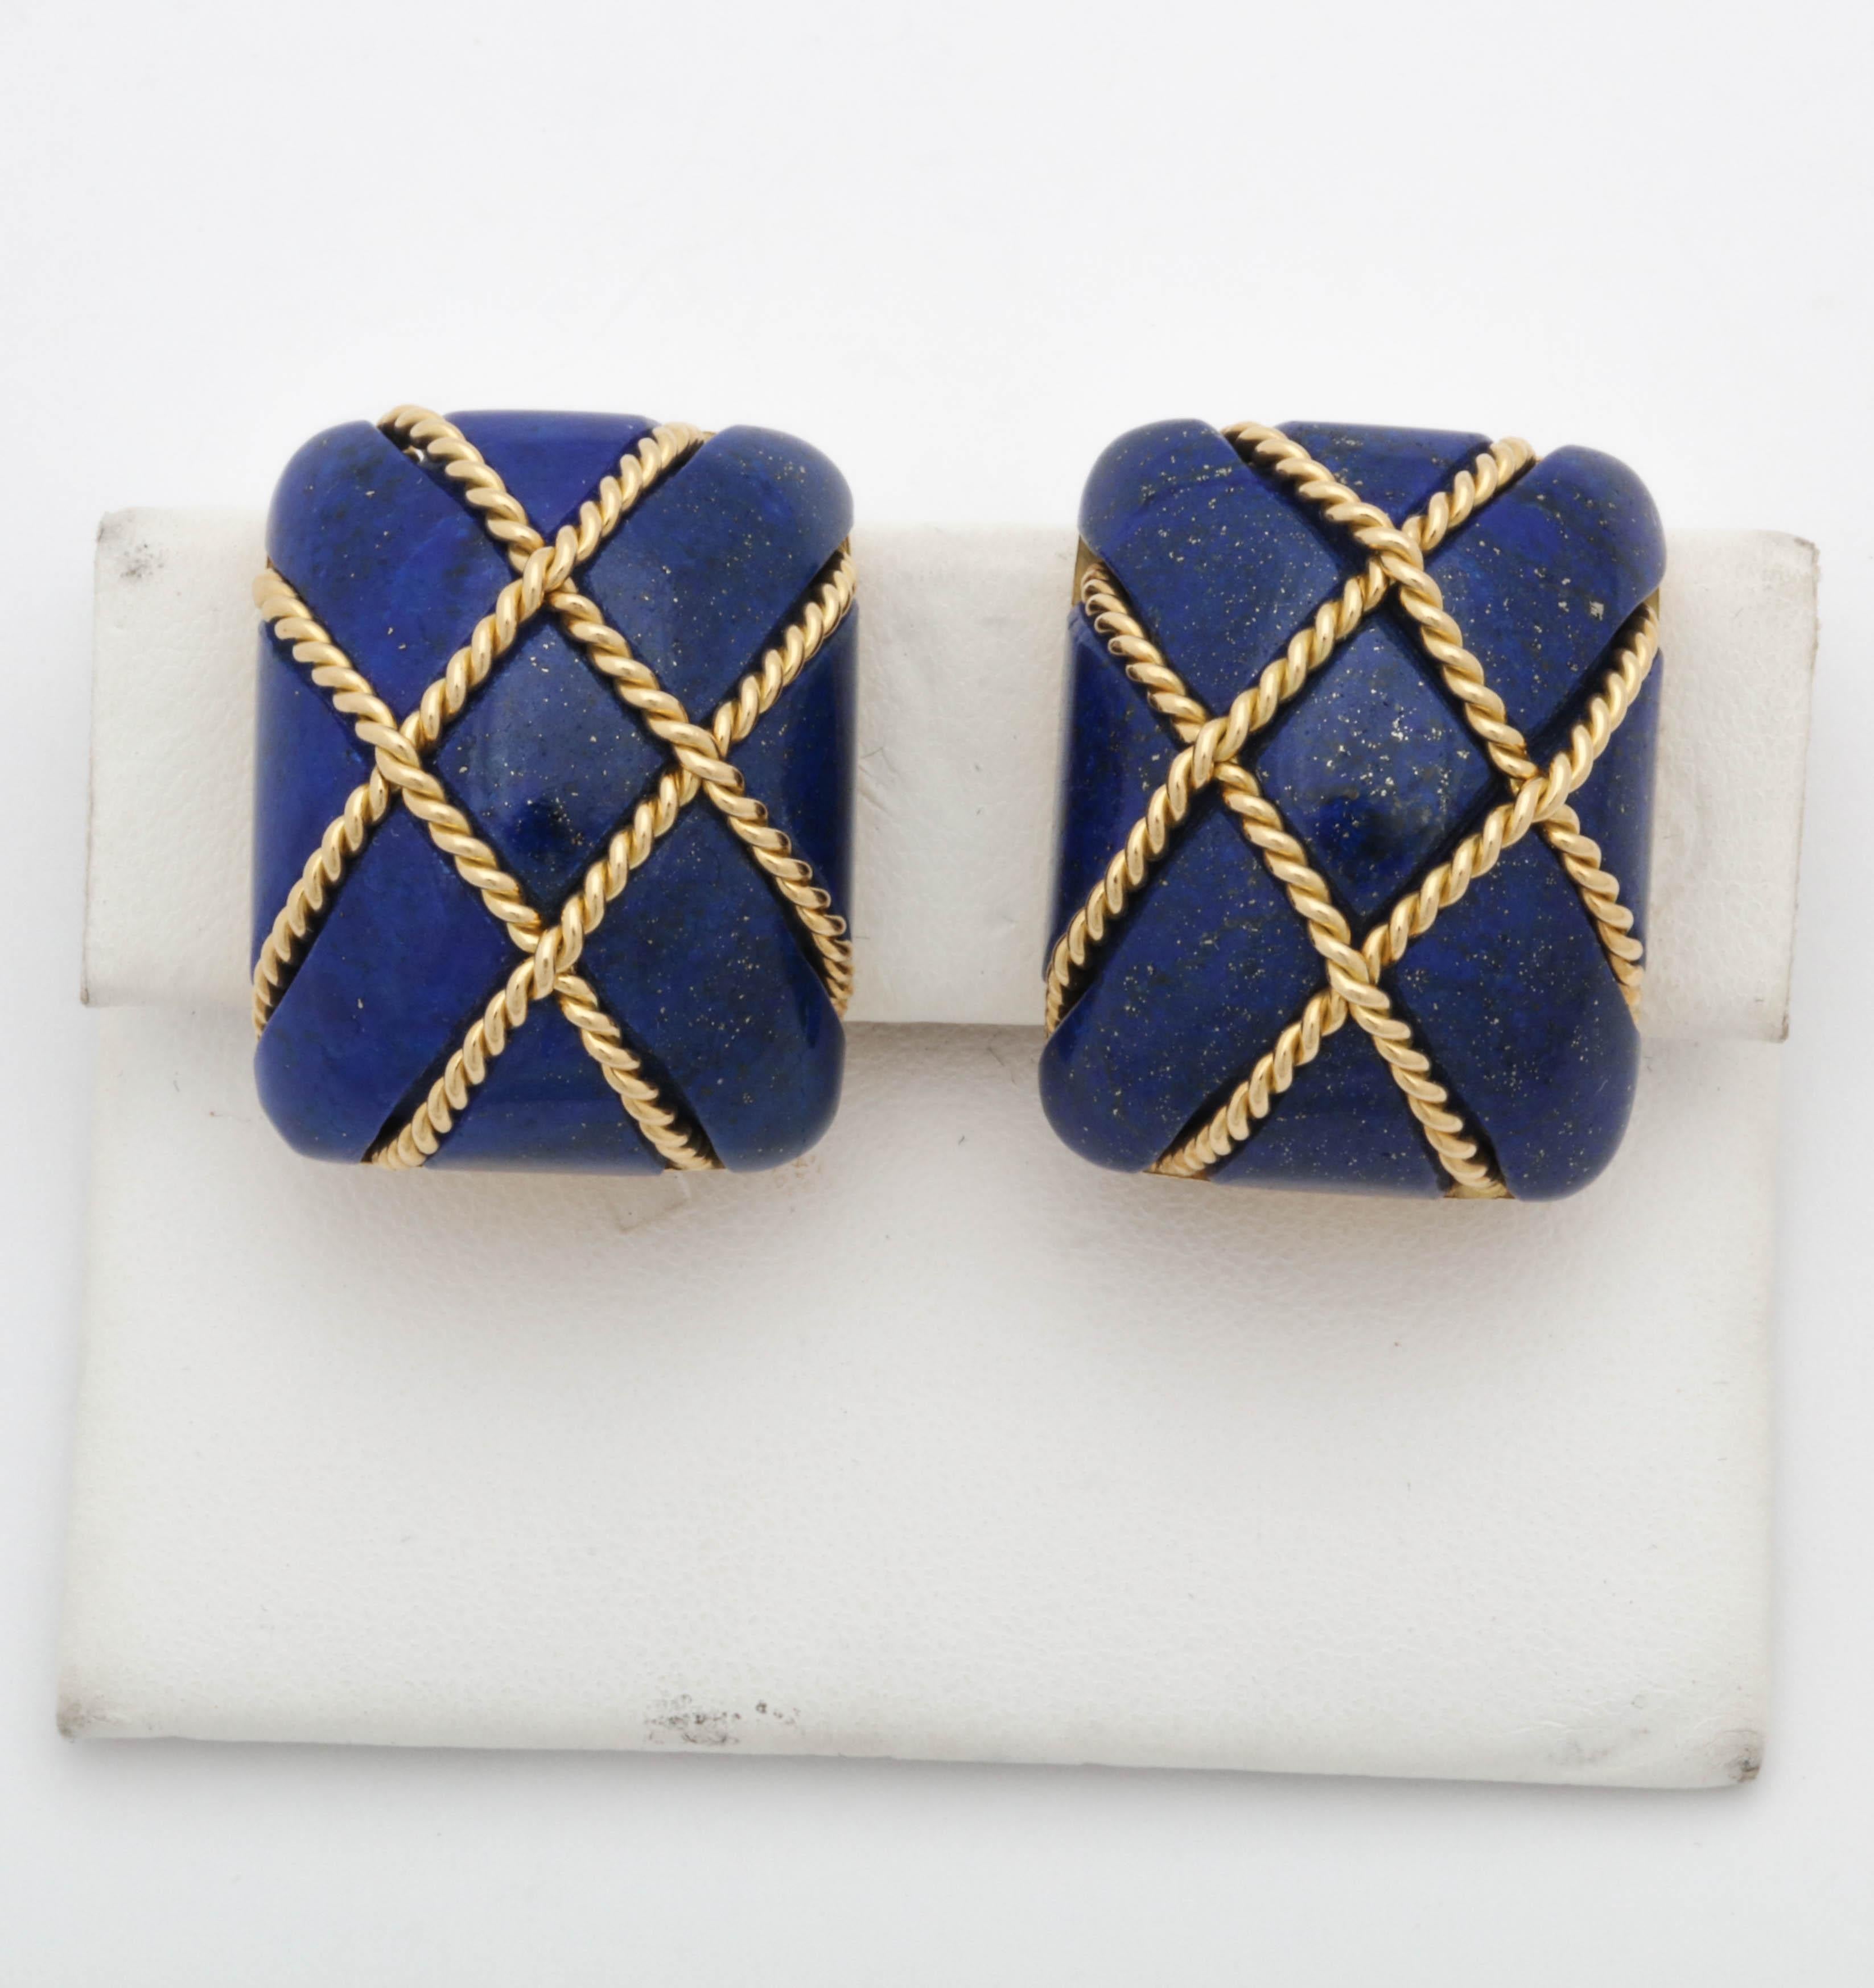 One Pair Of Ladies Seaman Schepps Earrings Composed Of 18kt Yellow Gold In The Cage Rope Design. Centering A Large 25 MM Sugarloaf Cut Lapis Lazuli Sto,ne. Clip On Backs,NOTE: POSTS May Be Added For Pierced Ears.Serial # P 20045. American Made.